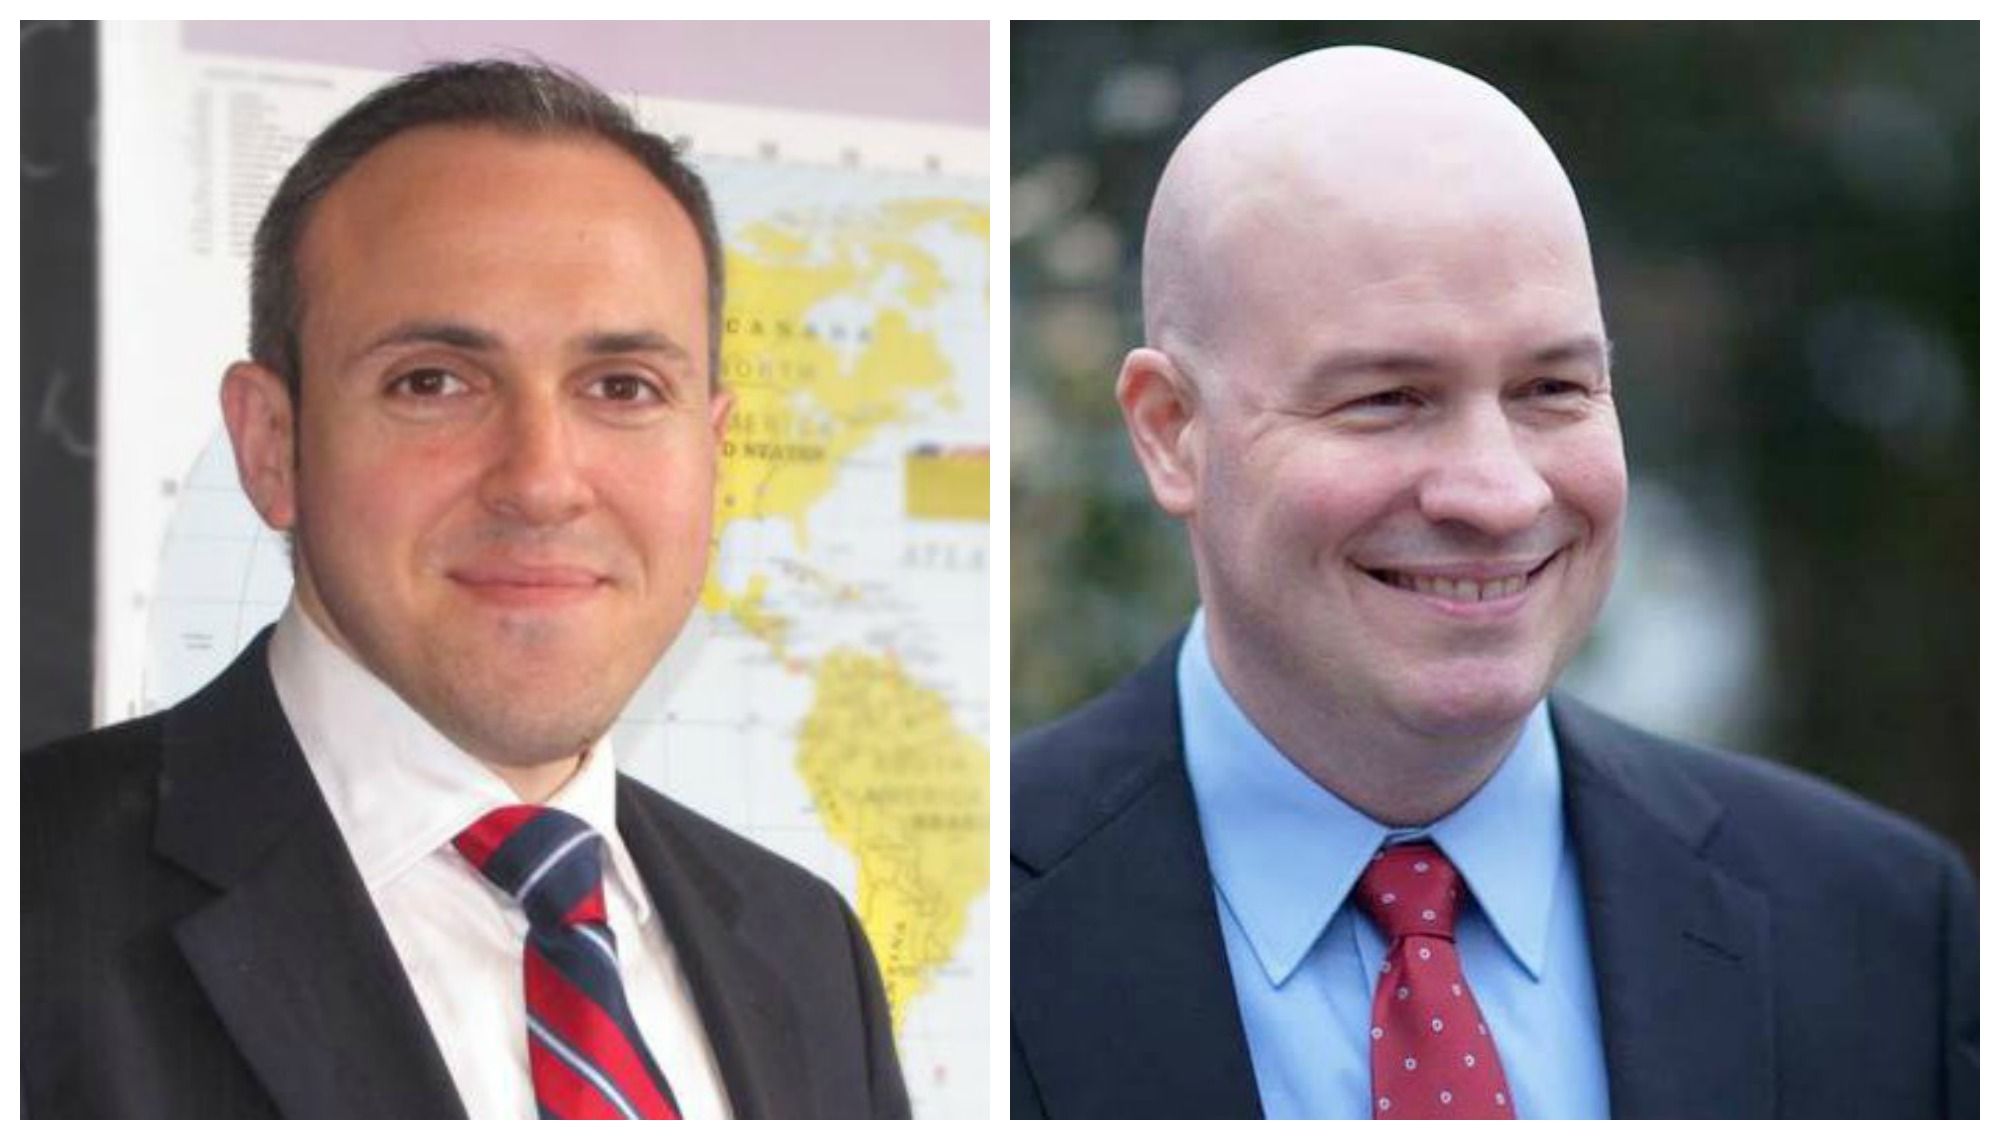 33 Community Leaders & Activists Endorse Treyger For State Committee